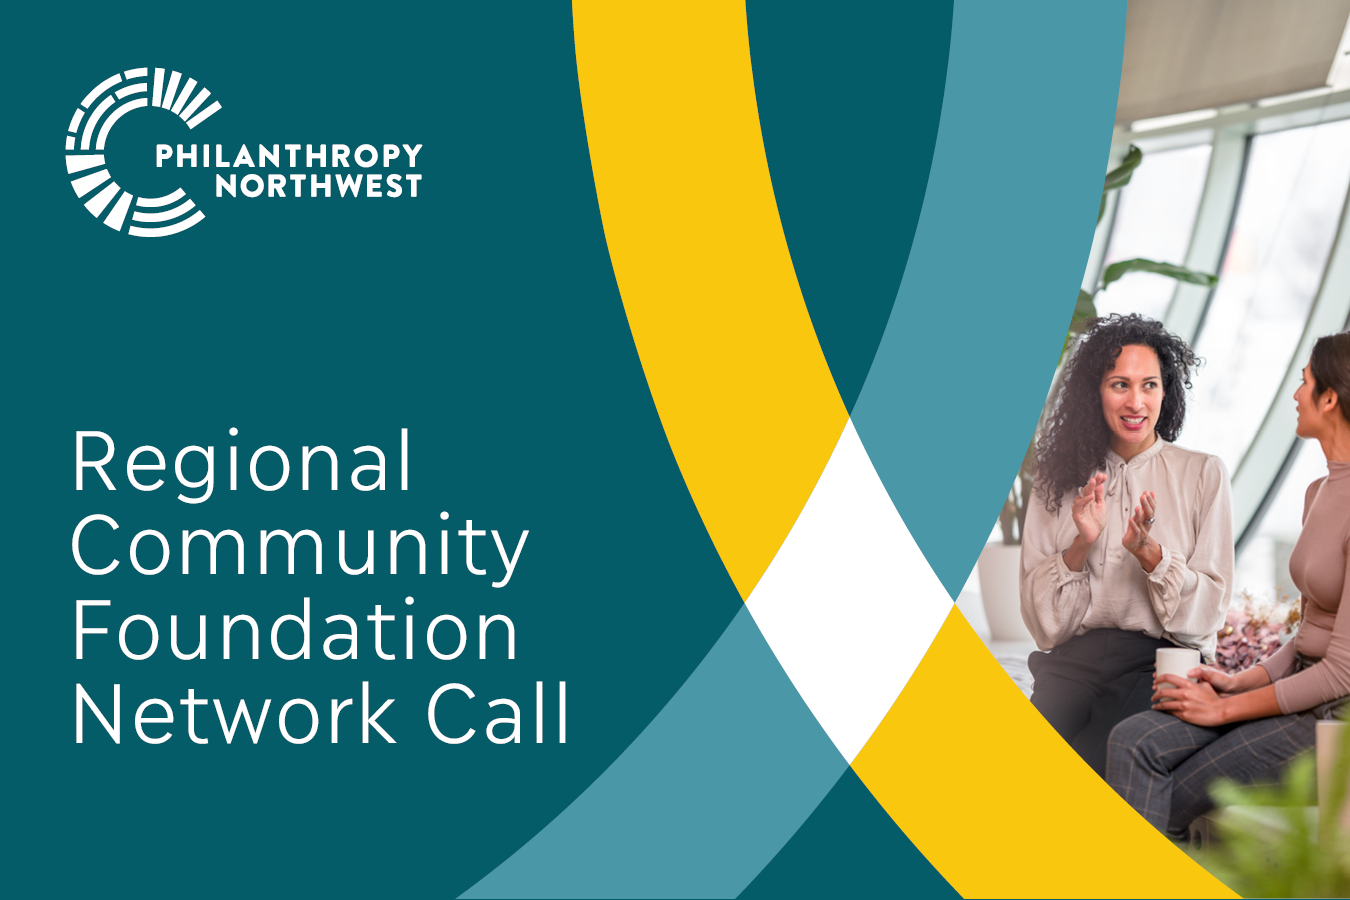 Event banner that says "Regional Community Foundation Network Call." Graphic ocean-blue background with title in white; across the bottom section two arches in yellow and river-blue intersect to form a white diamond. Photo: two women talking